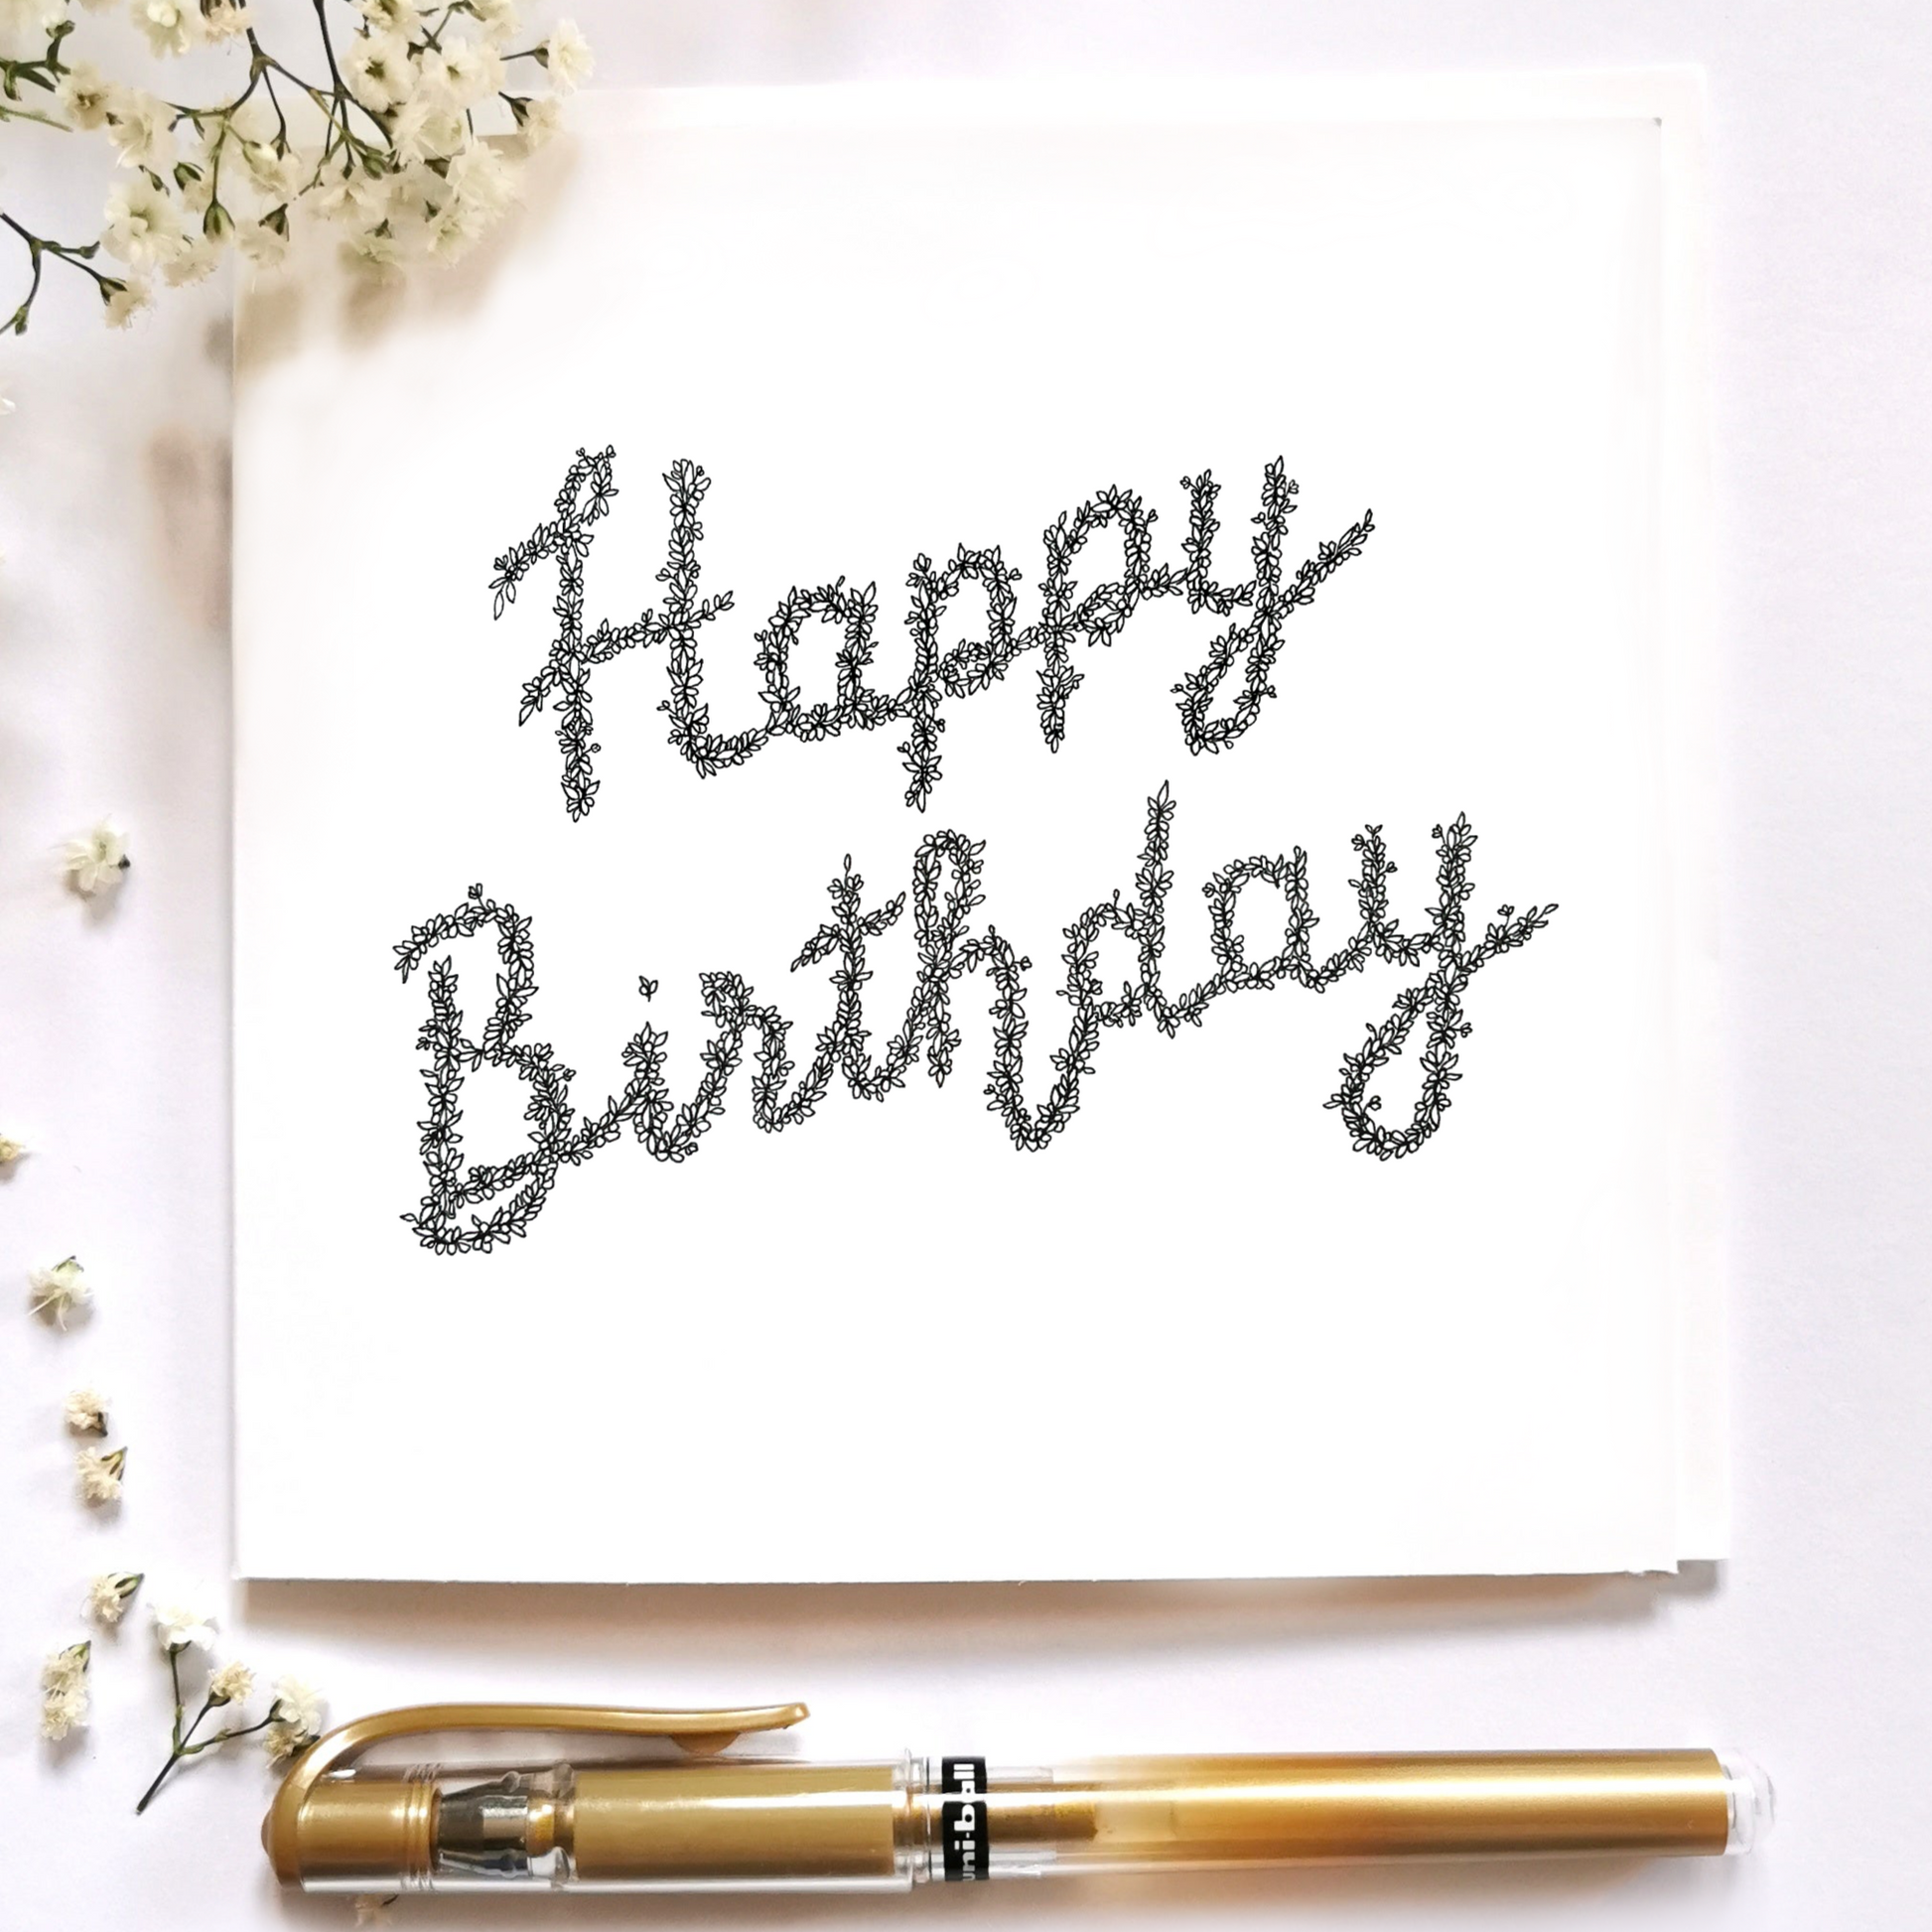 Image shows illustration Card of The phrase Happy Birthday. Happy is drawn on top whilst Birthday is drawn directly below centred of the page. Illustration is surrounded by a gold pen and white flowers. 